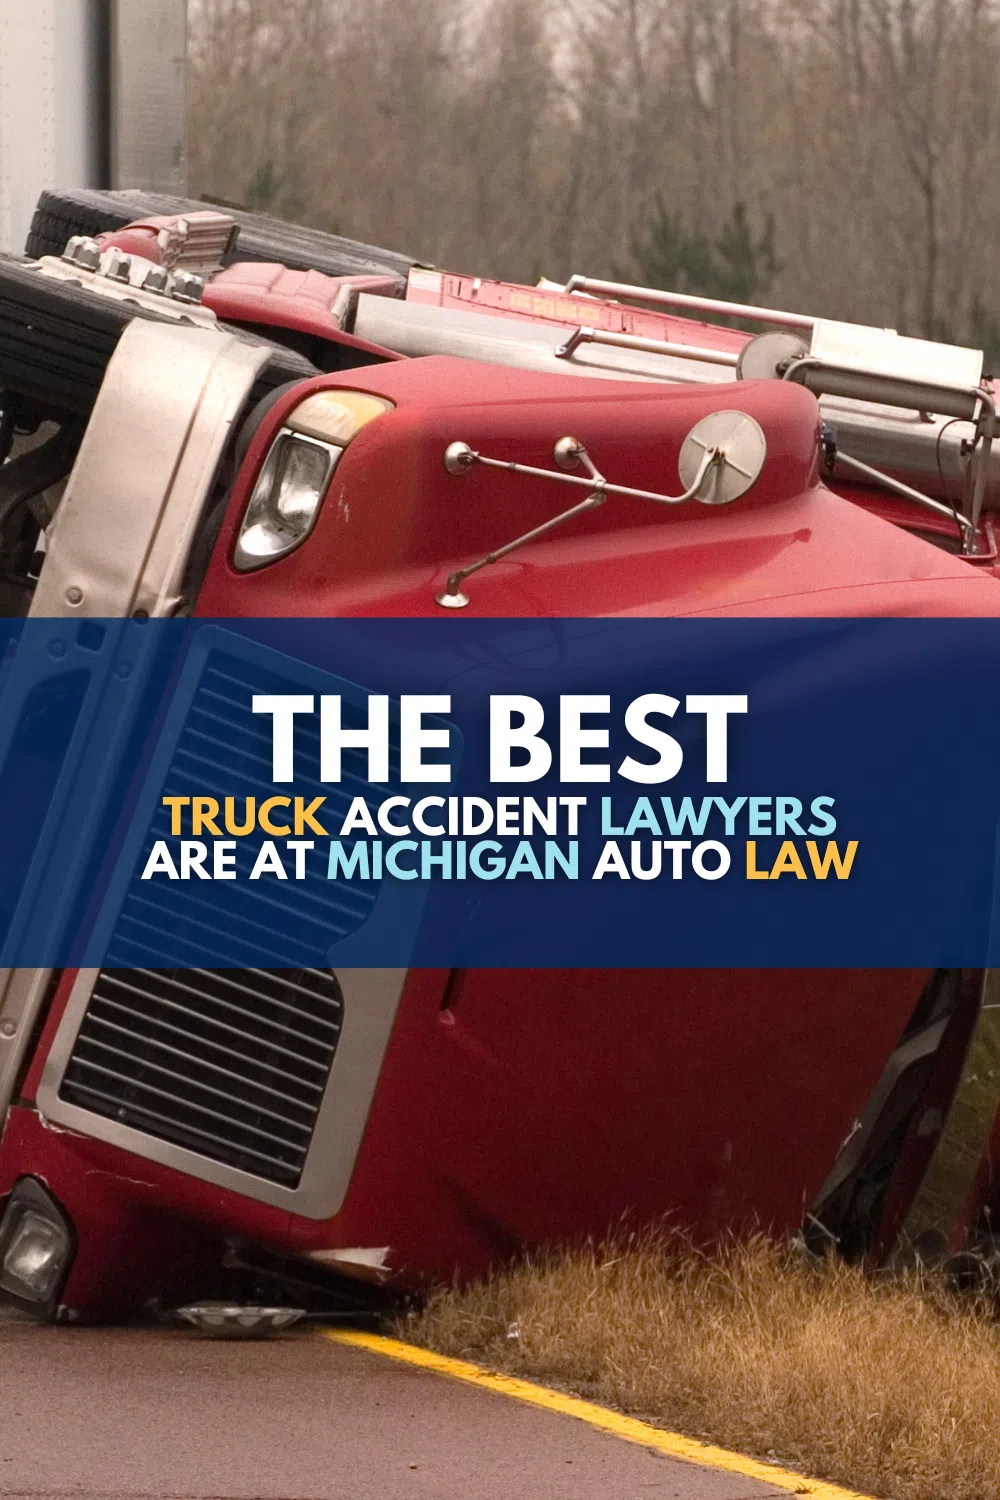 The Best Truck Accident Lawyers Are At Michigan Auto Law